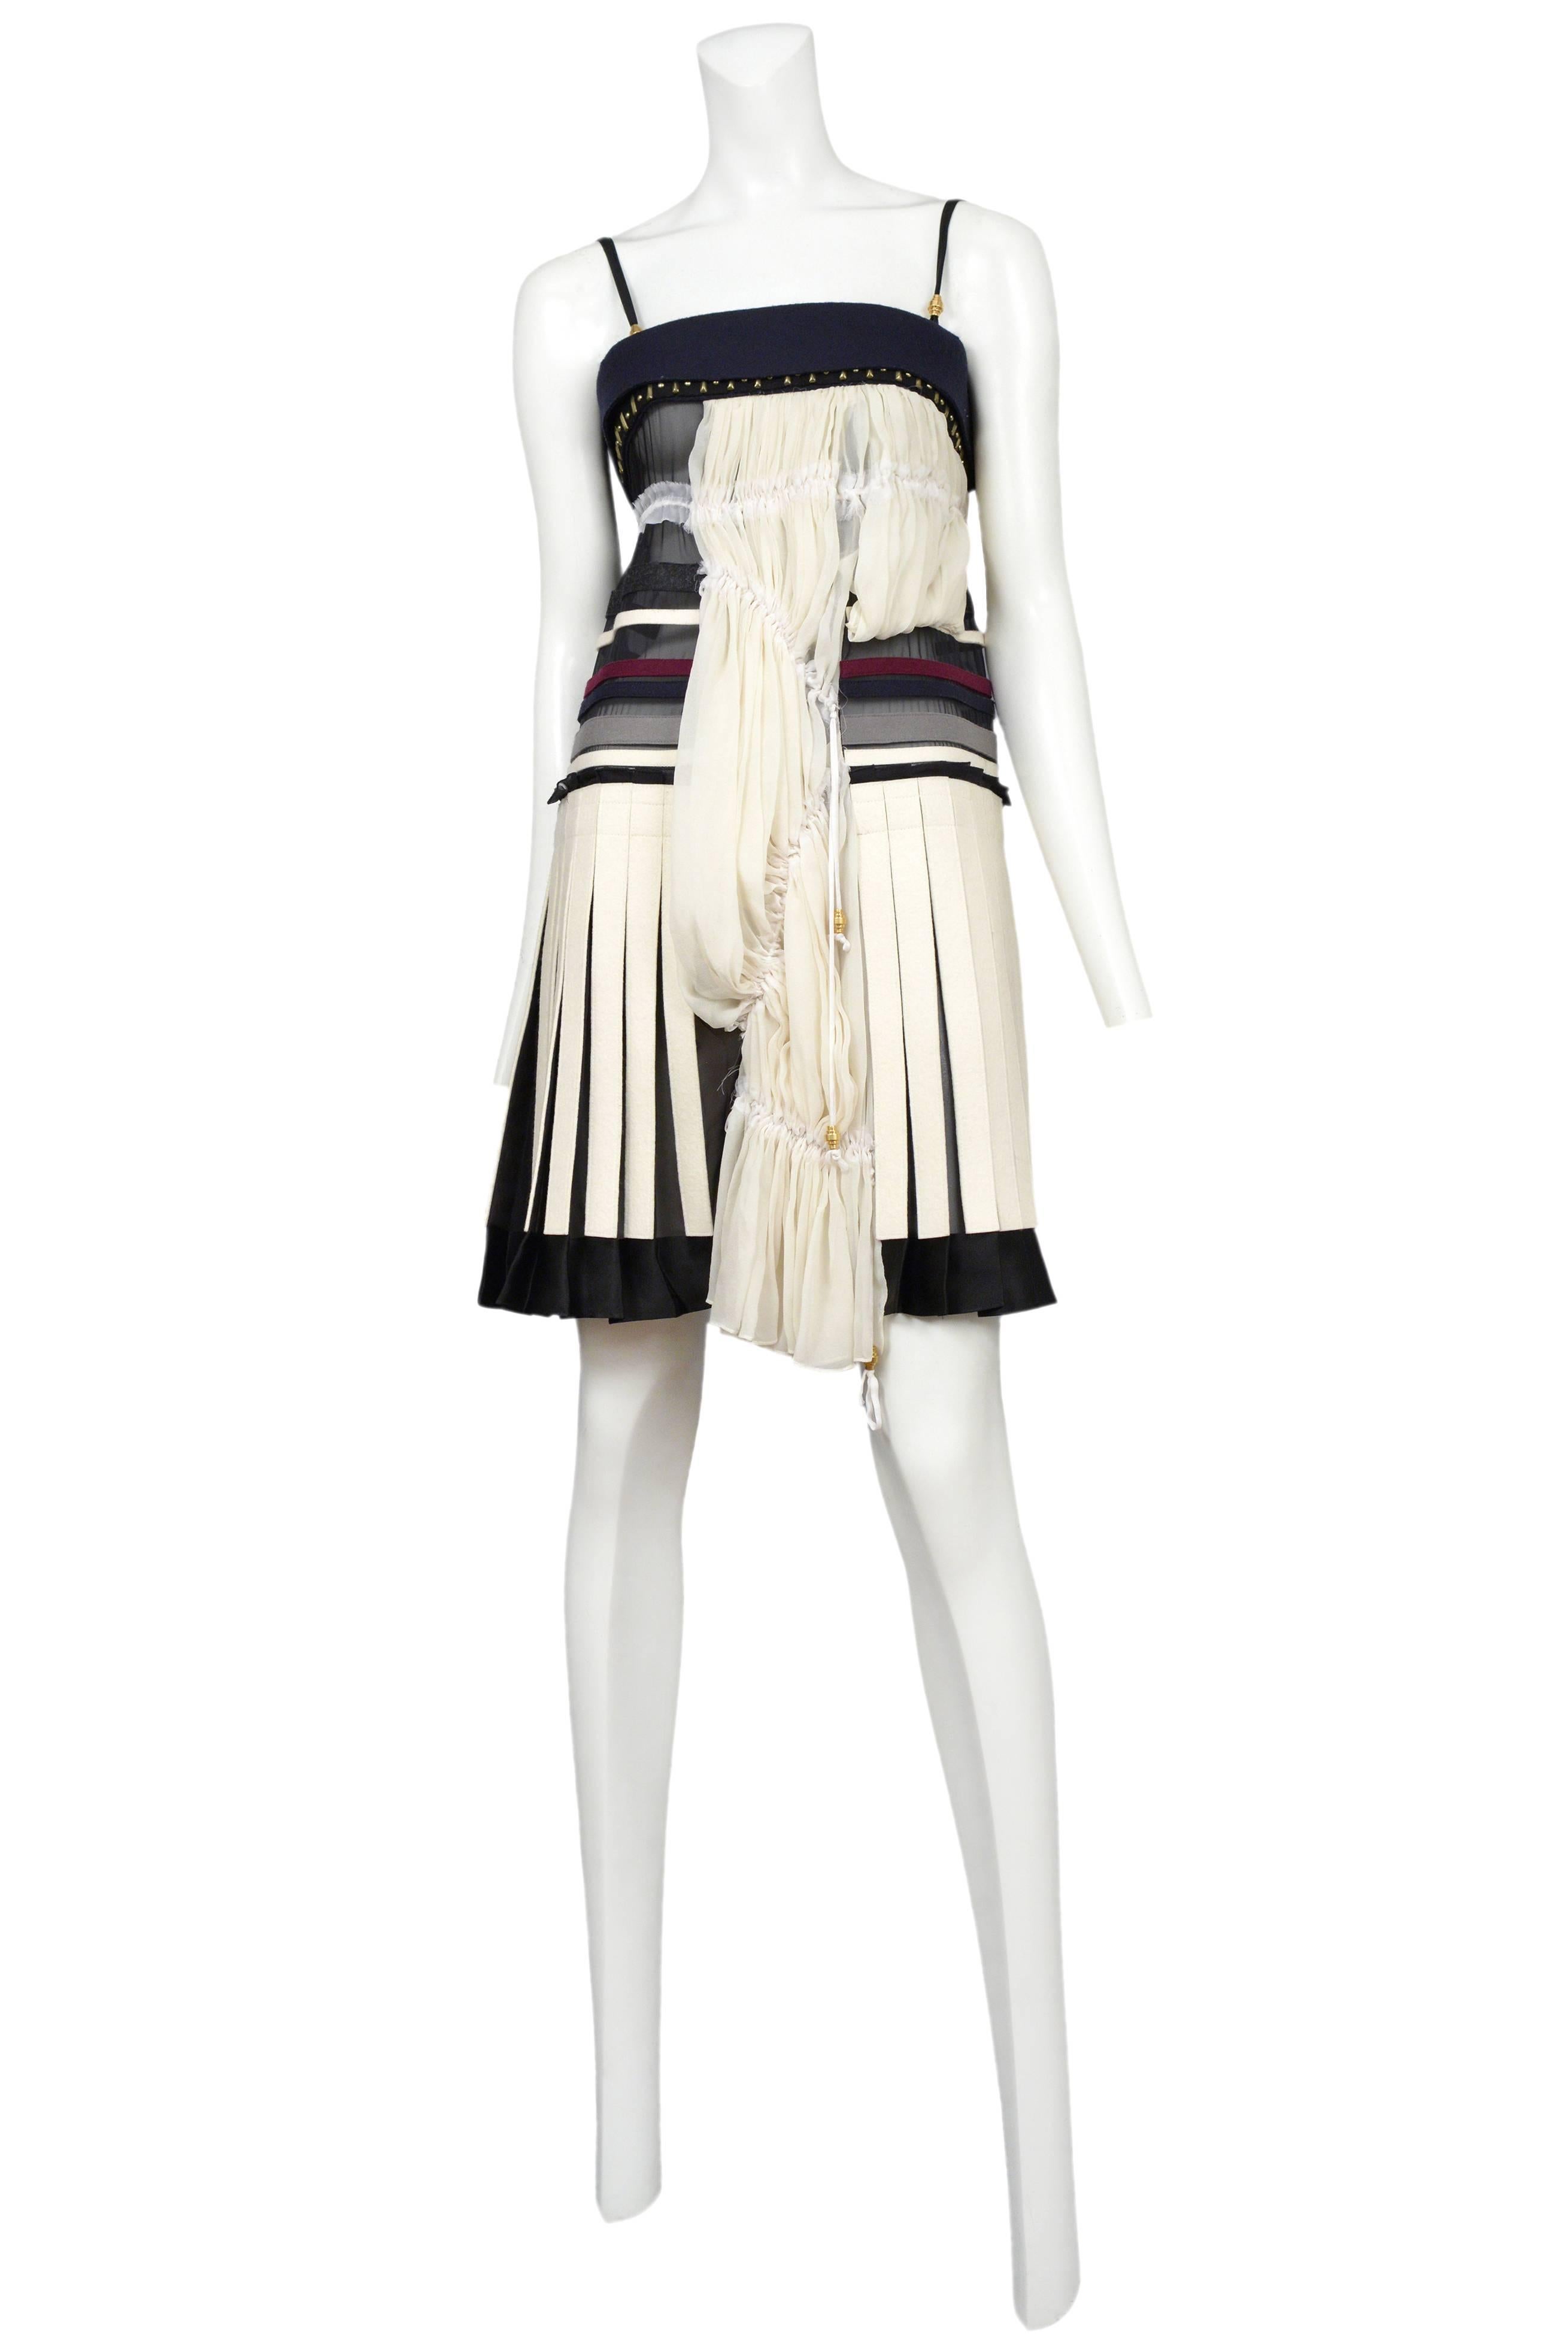 Vintage Nicolas Ghesquière for Balenciaga above the knee dress featuring spaghetti straps adorned with gold tone beads, a navy wool banded cuff at the top of the bust followed by a black row of brass studs that anchors black chiffon topped with